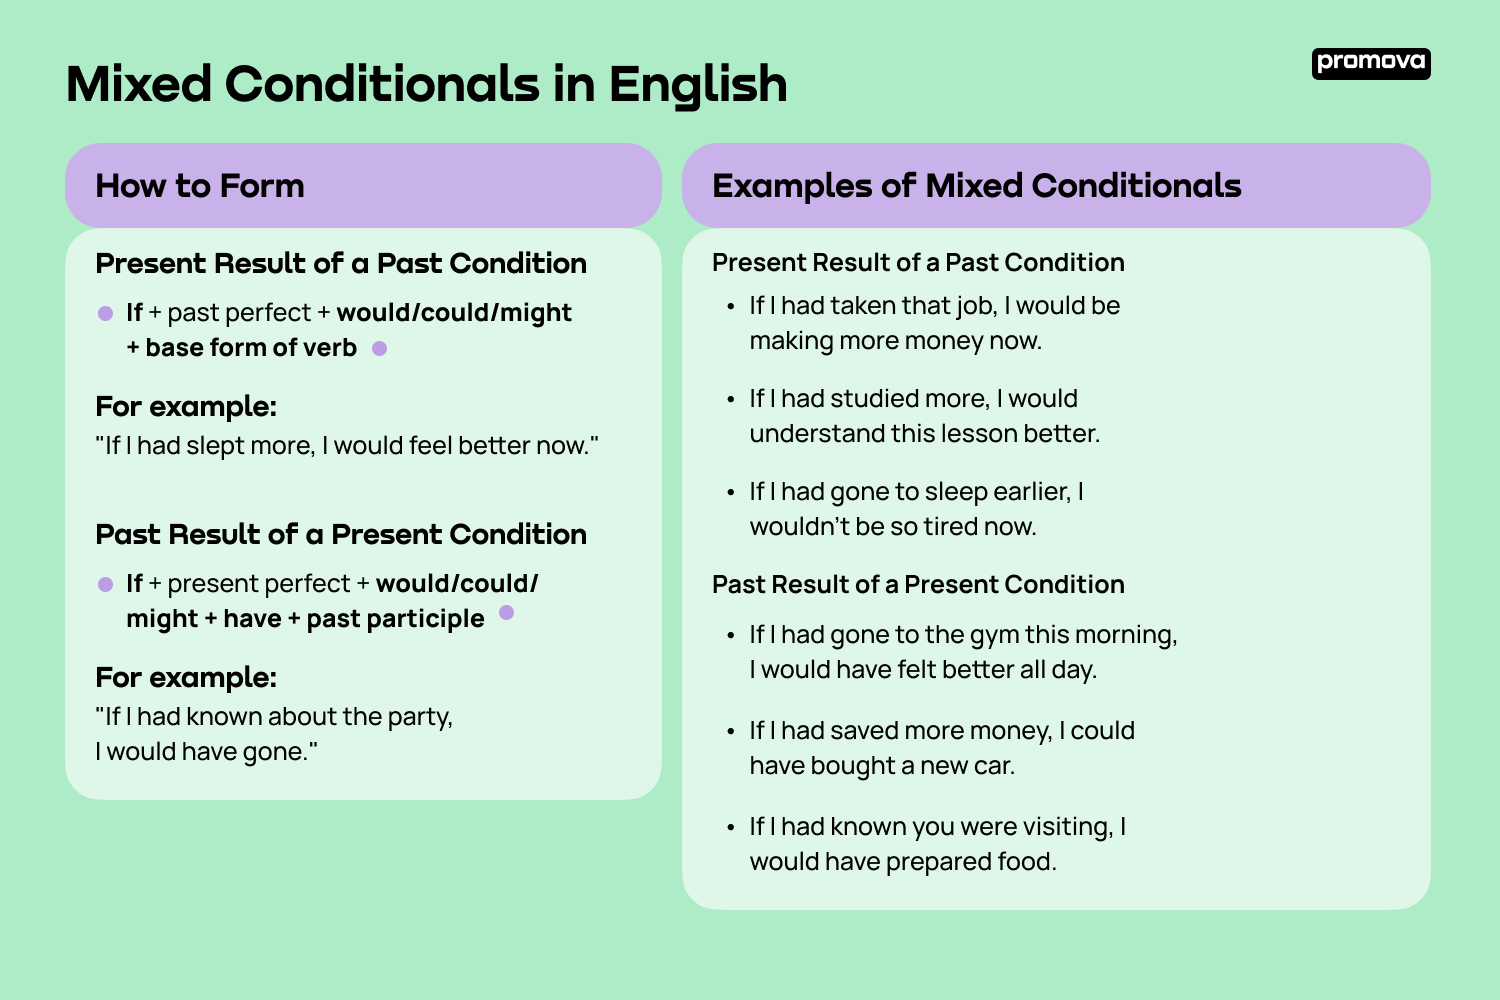 Examples of Mixed Conditionals